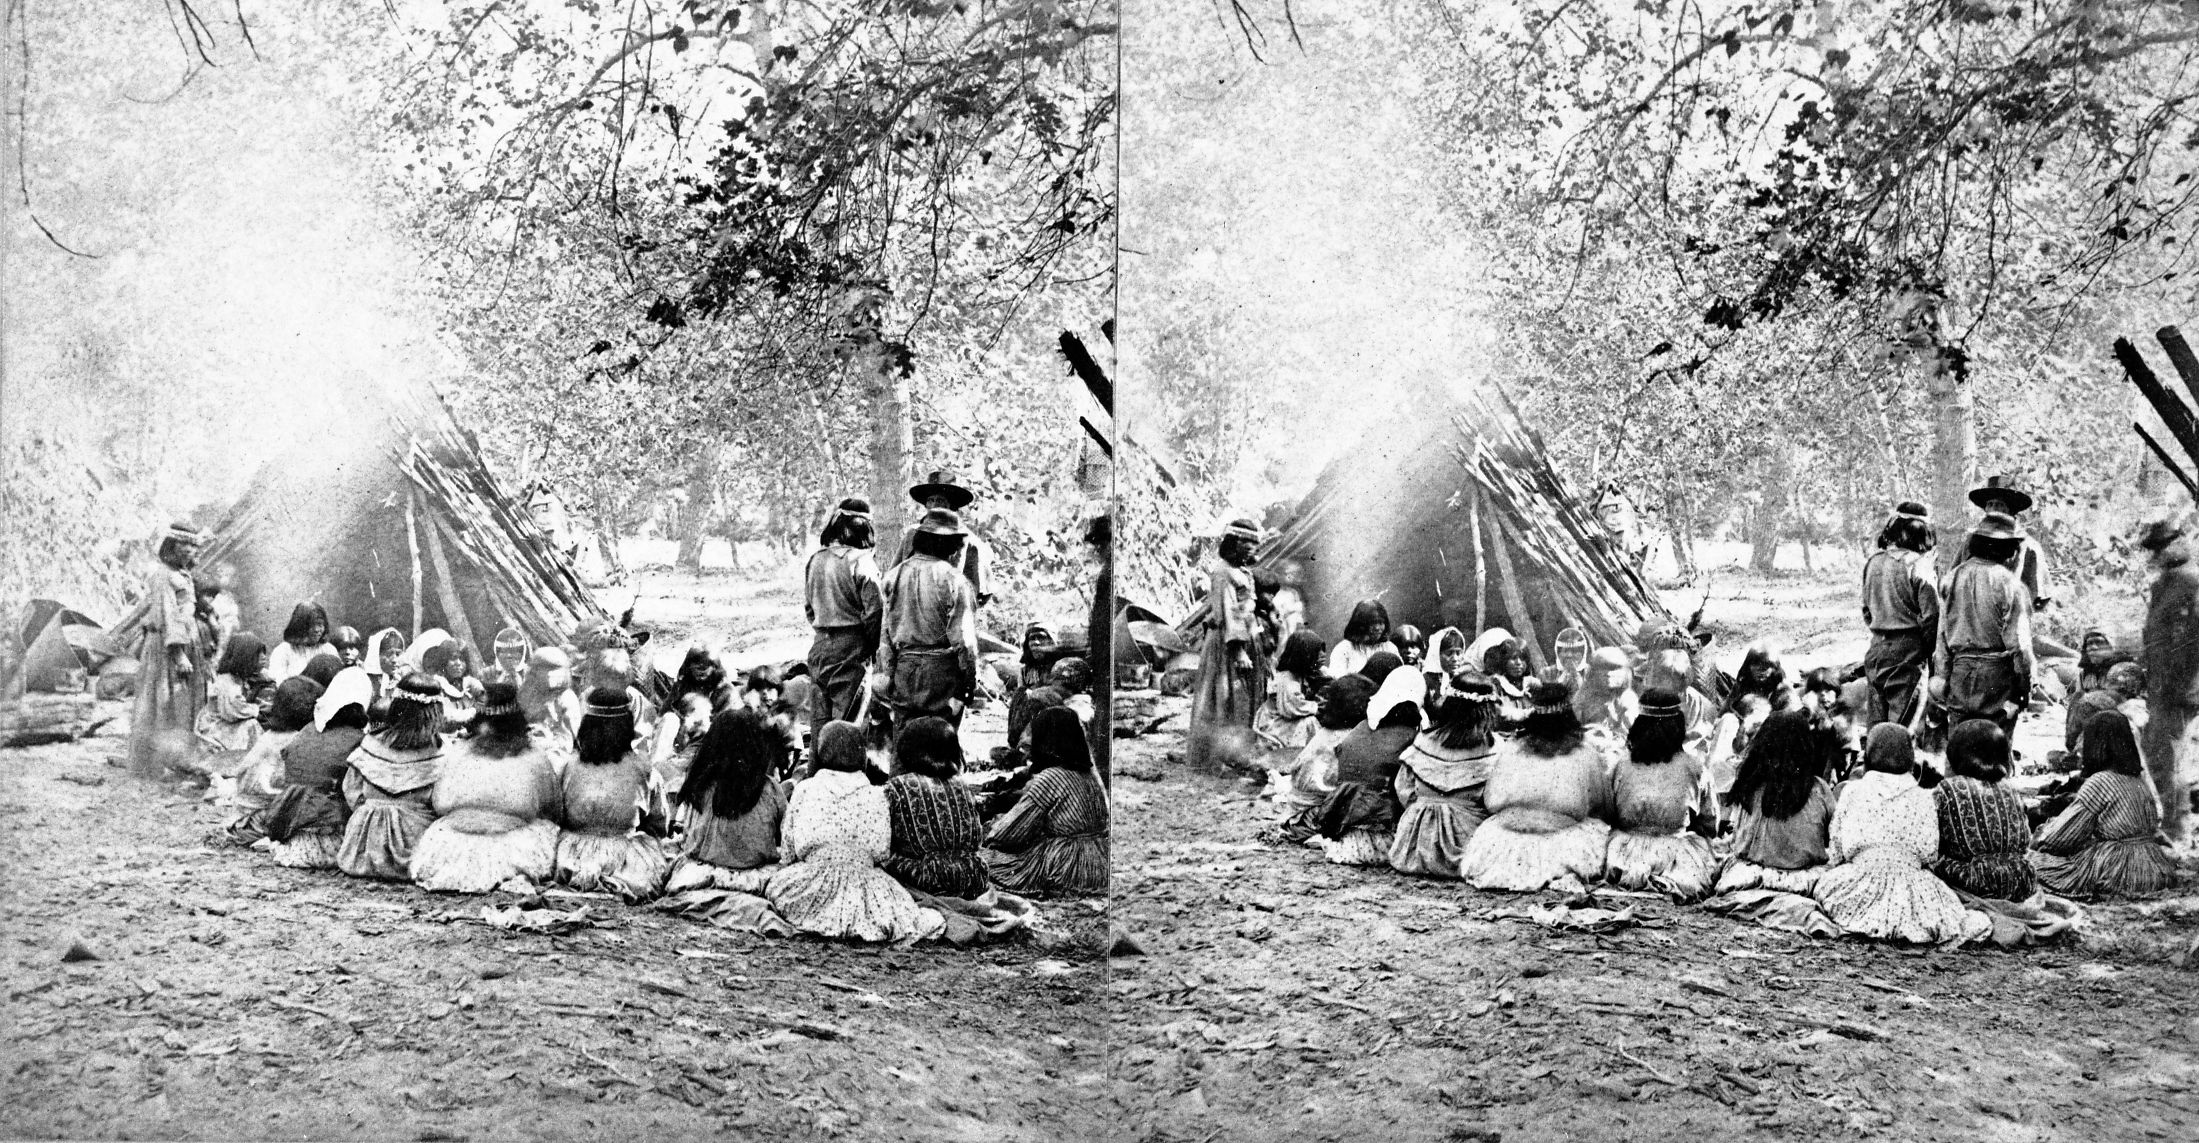 Morning Council on the Merced; A Muybridge stereograph of an 1872 trip to Yosemite Valley.